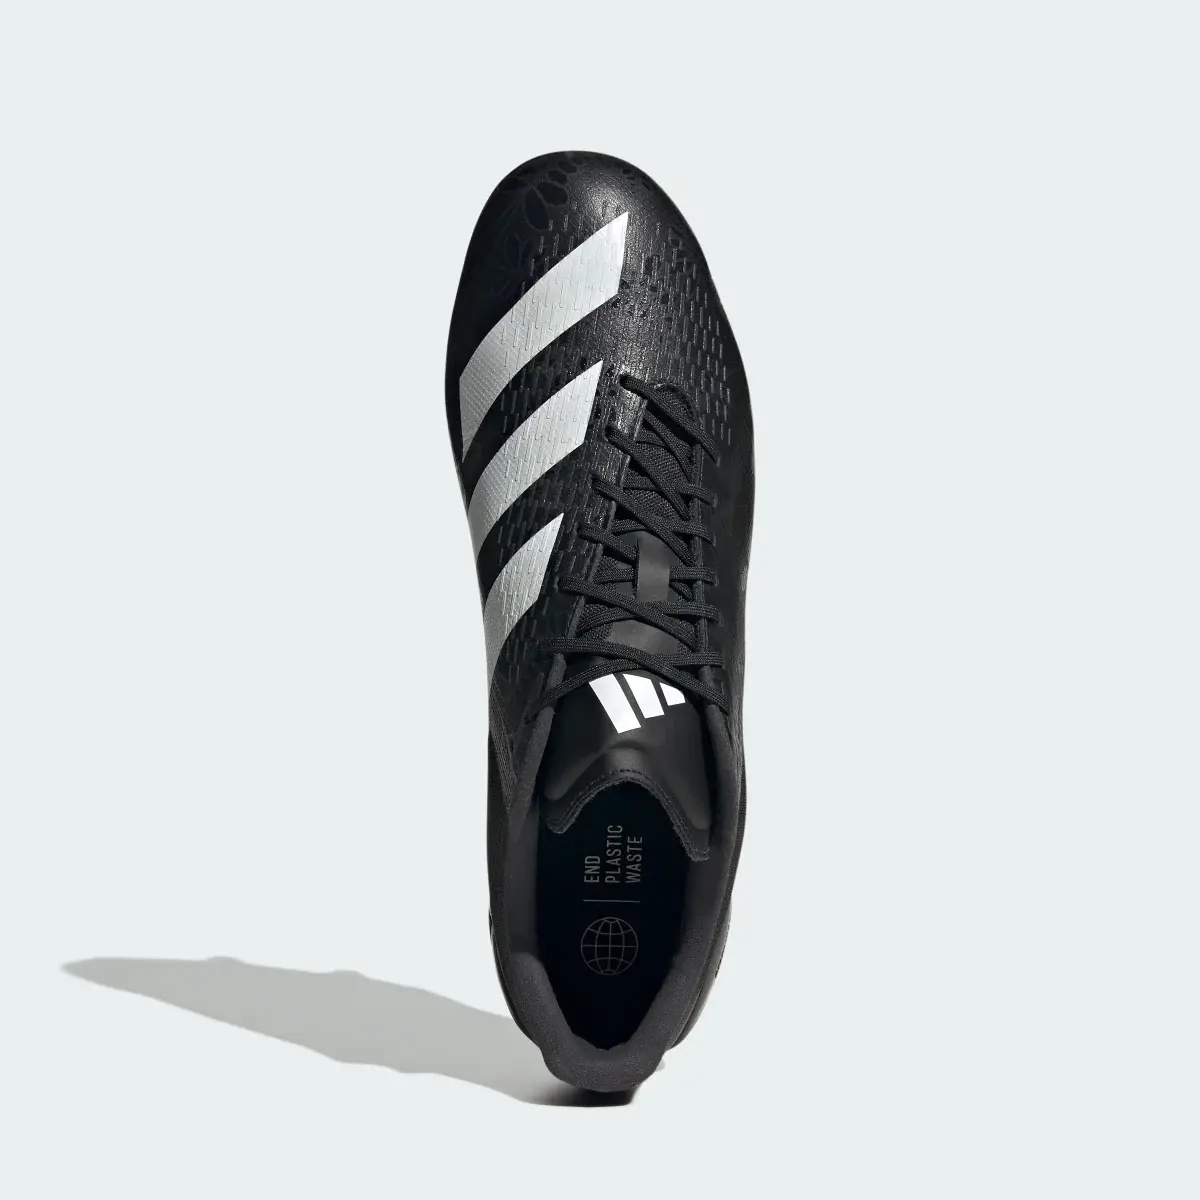 Adidas Adizero RS15 Pro Soft Ground Rugby Boots. 3